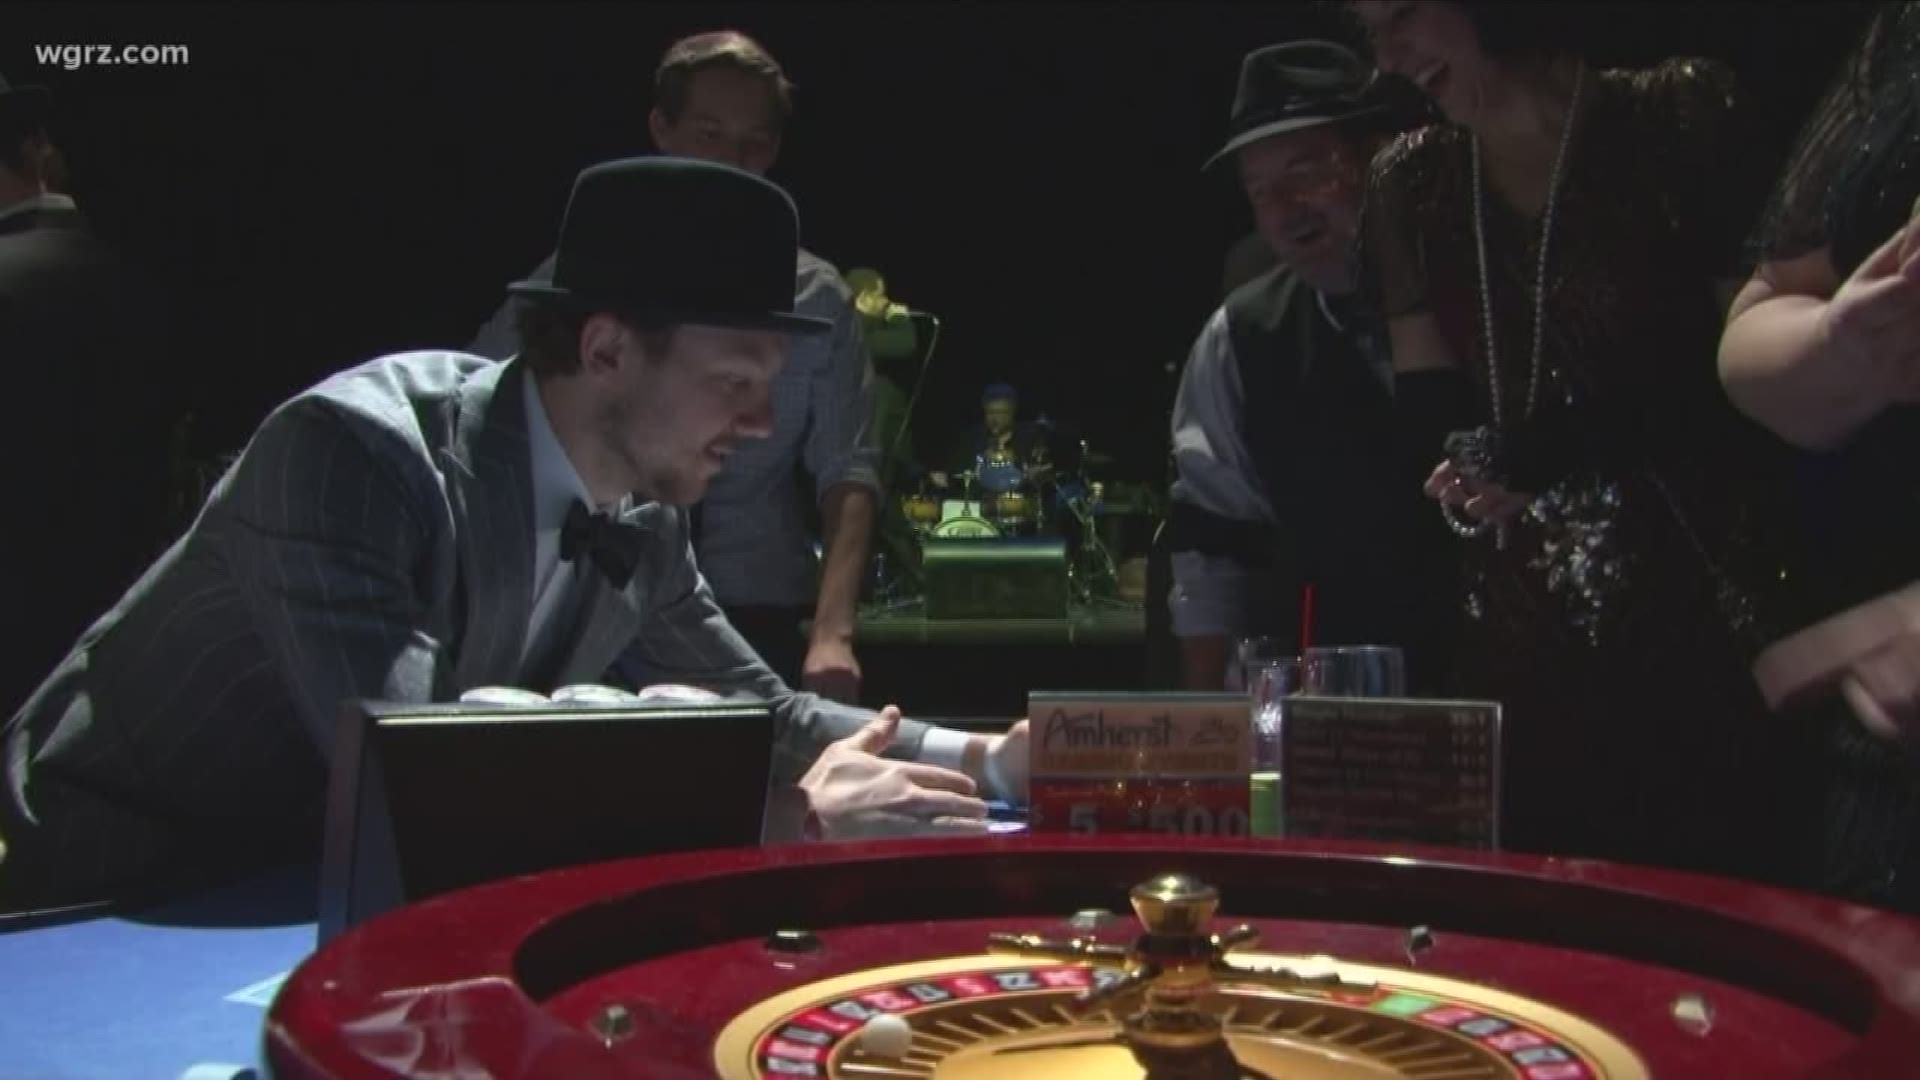 Buffalo's Town Ballroom was transformed into a prohibition era gambling hall with Buffalo Sabres players acting as table game dealers, to support Zach Bogosian's Bogo Bunch Foundation which raises money for cancer research and treatment.